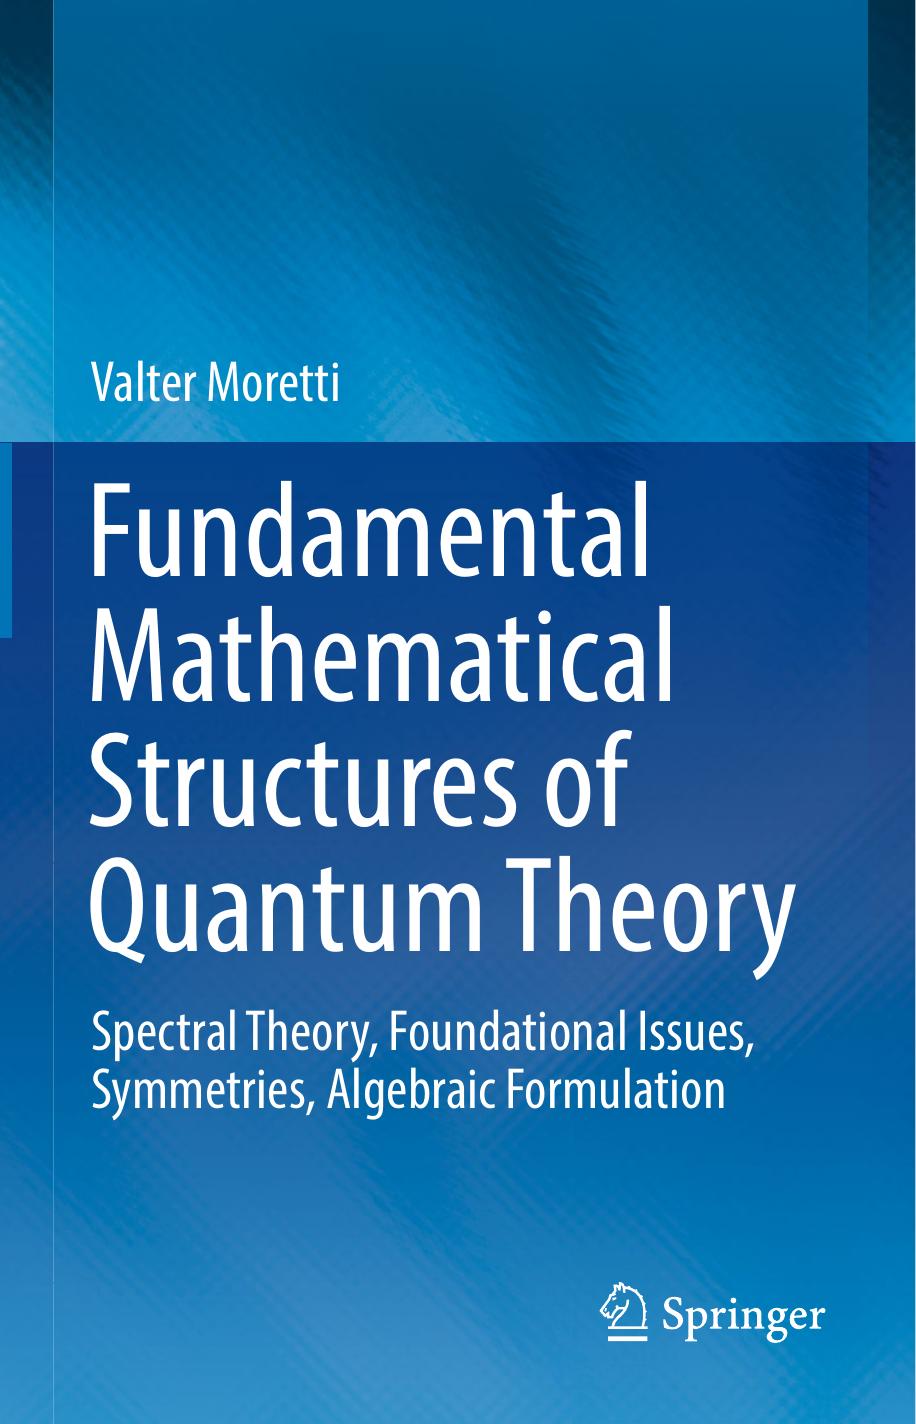 Fundamental Mathematical Structures of Quantum Theory: Spectral Theory, Foundational Issues, Symmetries, Algebraic Formulation